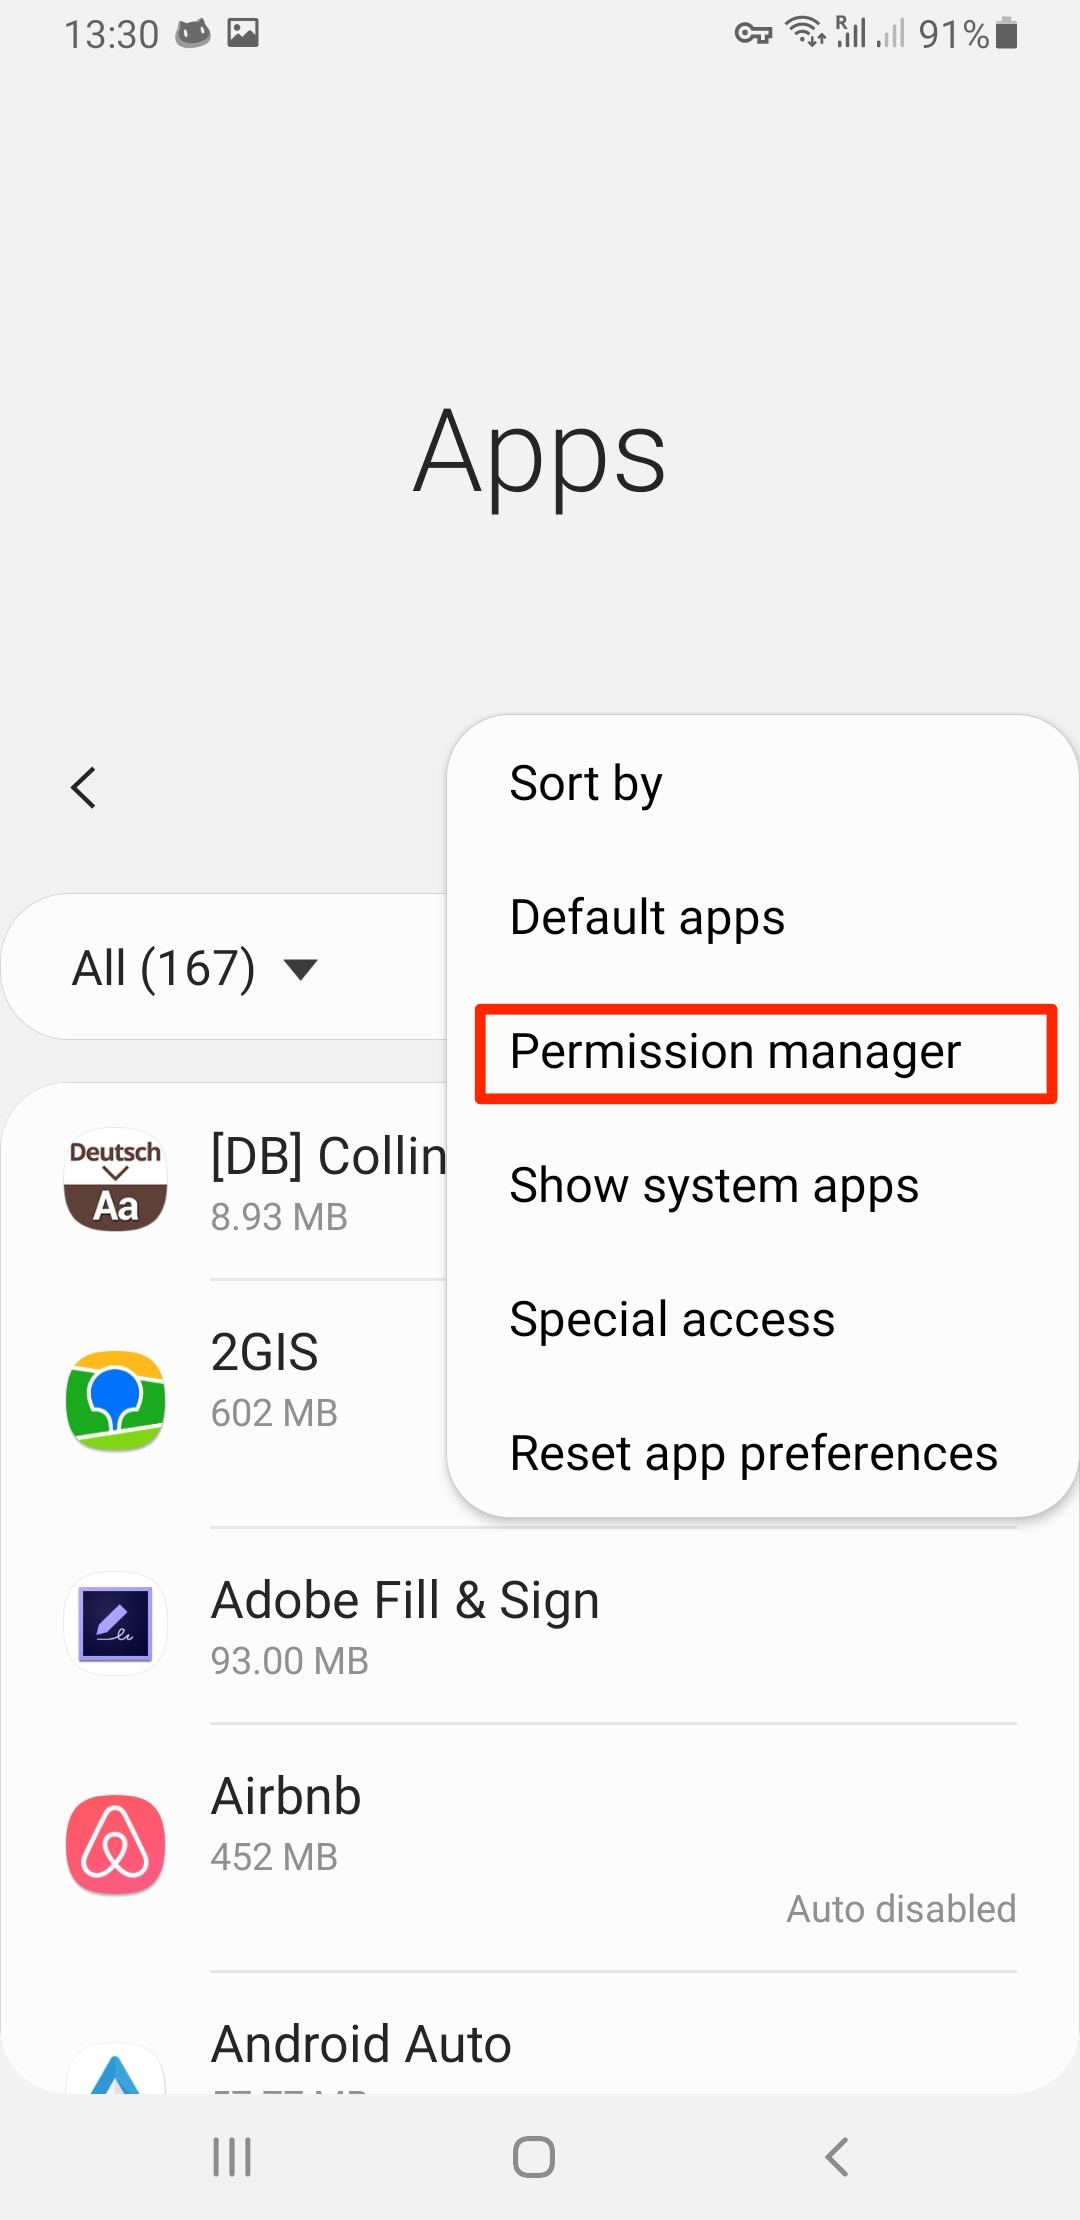 Open Apps > Permission manager